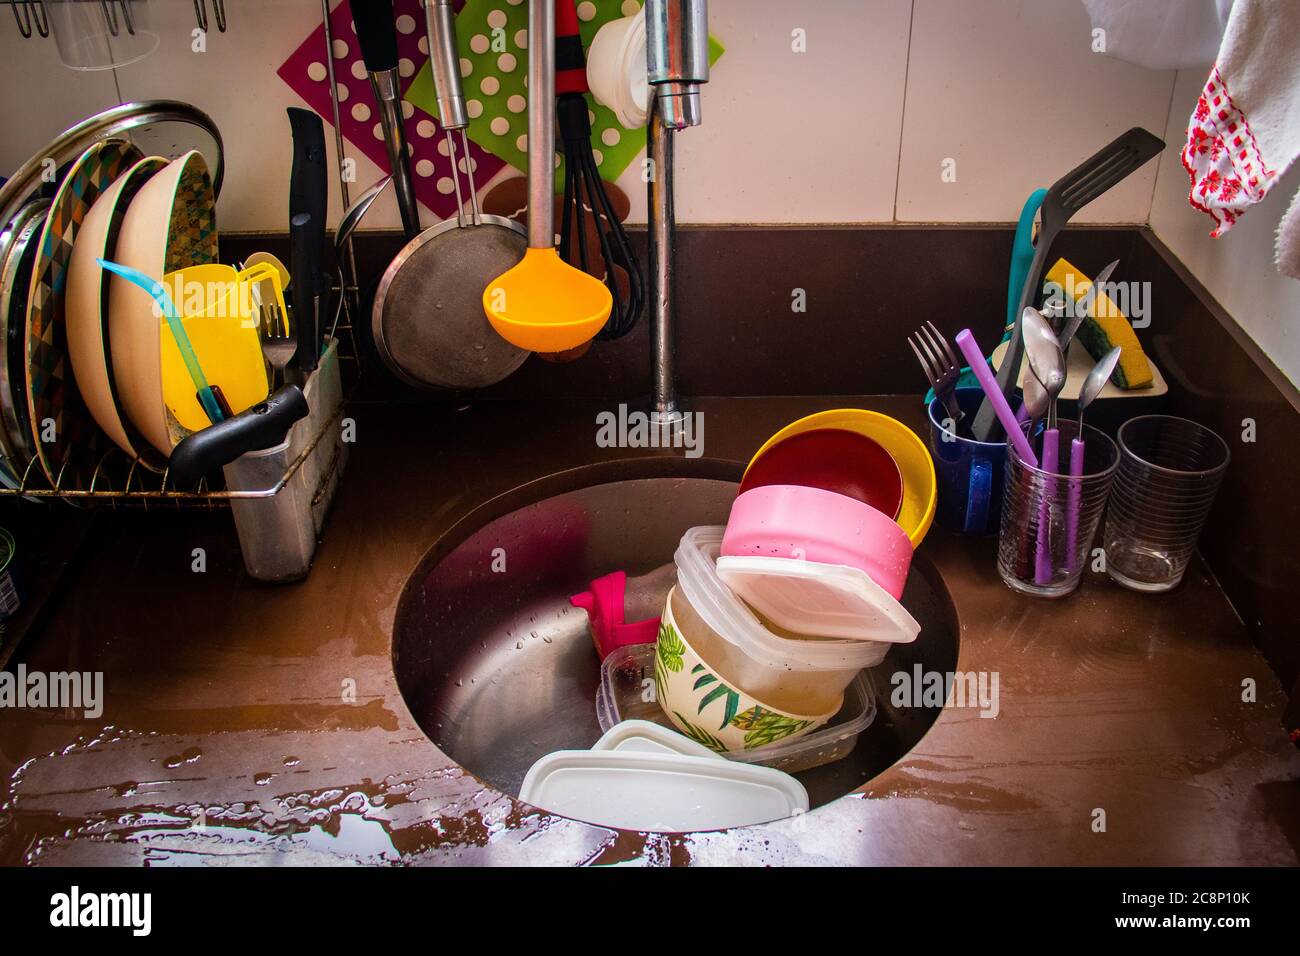 Dirty dishes in a kitchen sink Stock Photo